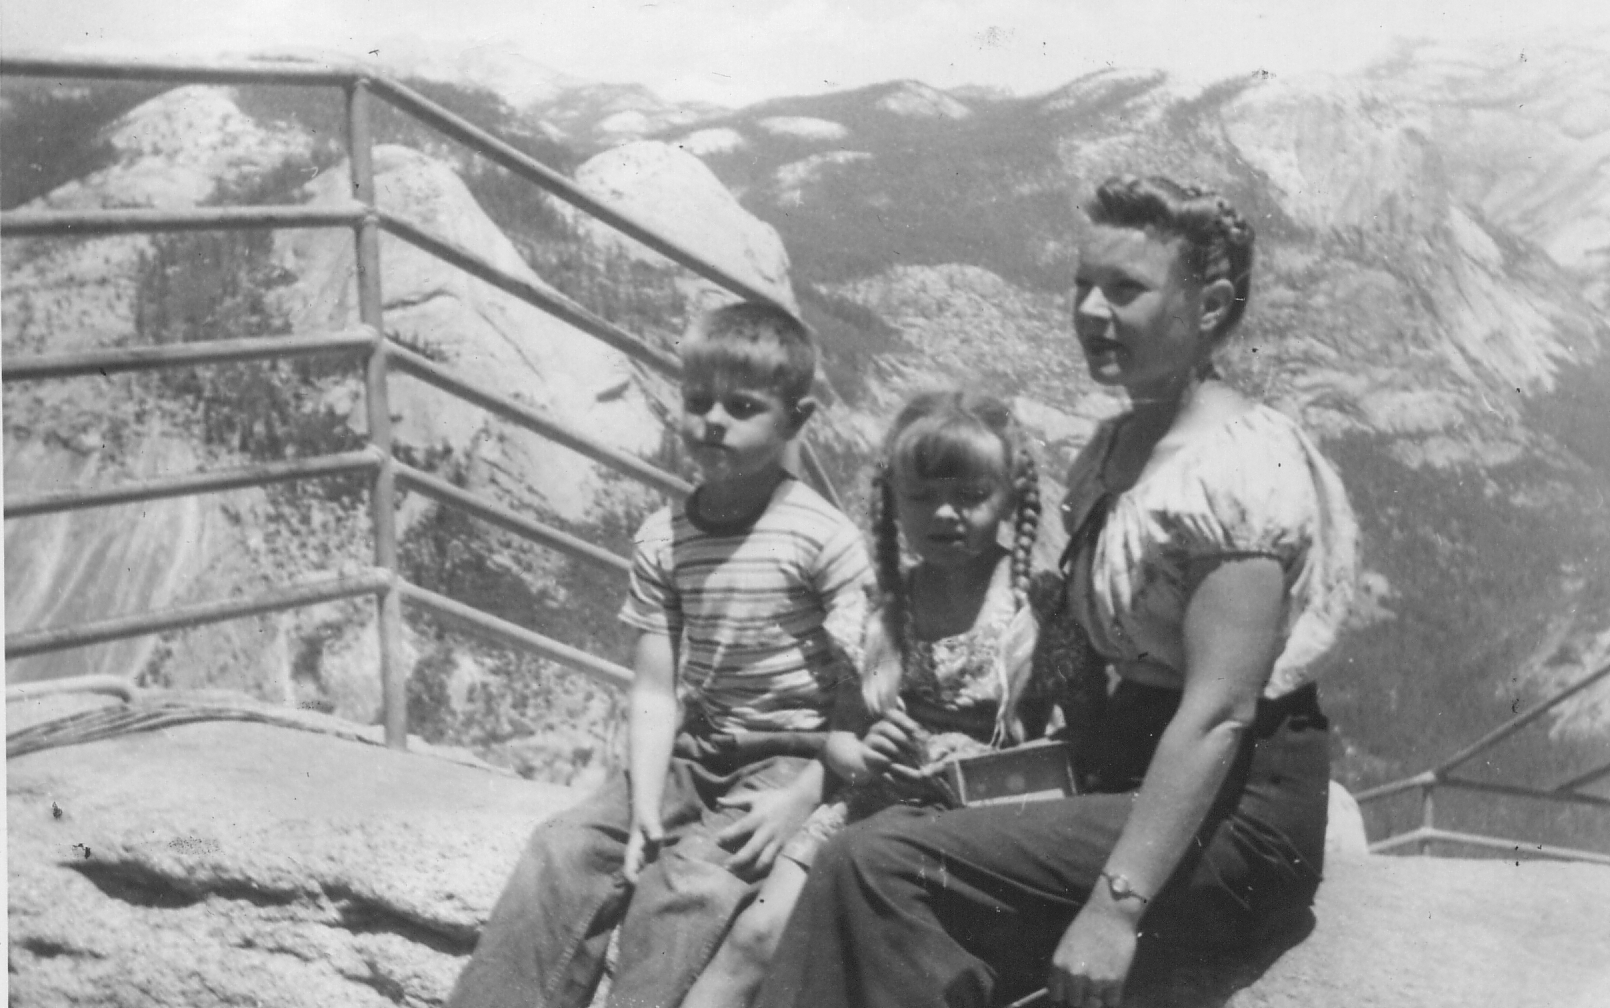 My dad, my aunt Susan and my grandmother in Yosemite, 1947. I would say they'd rather be home watching TV except they didn't own a TV until many years later. View full size.